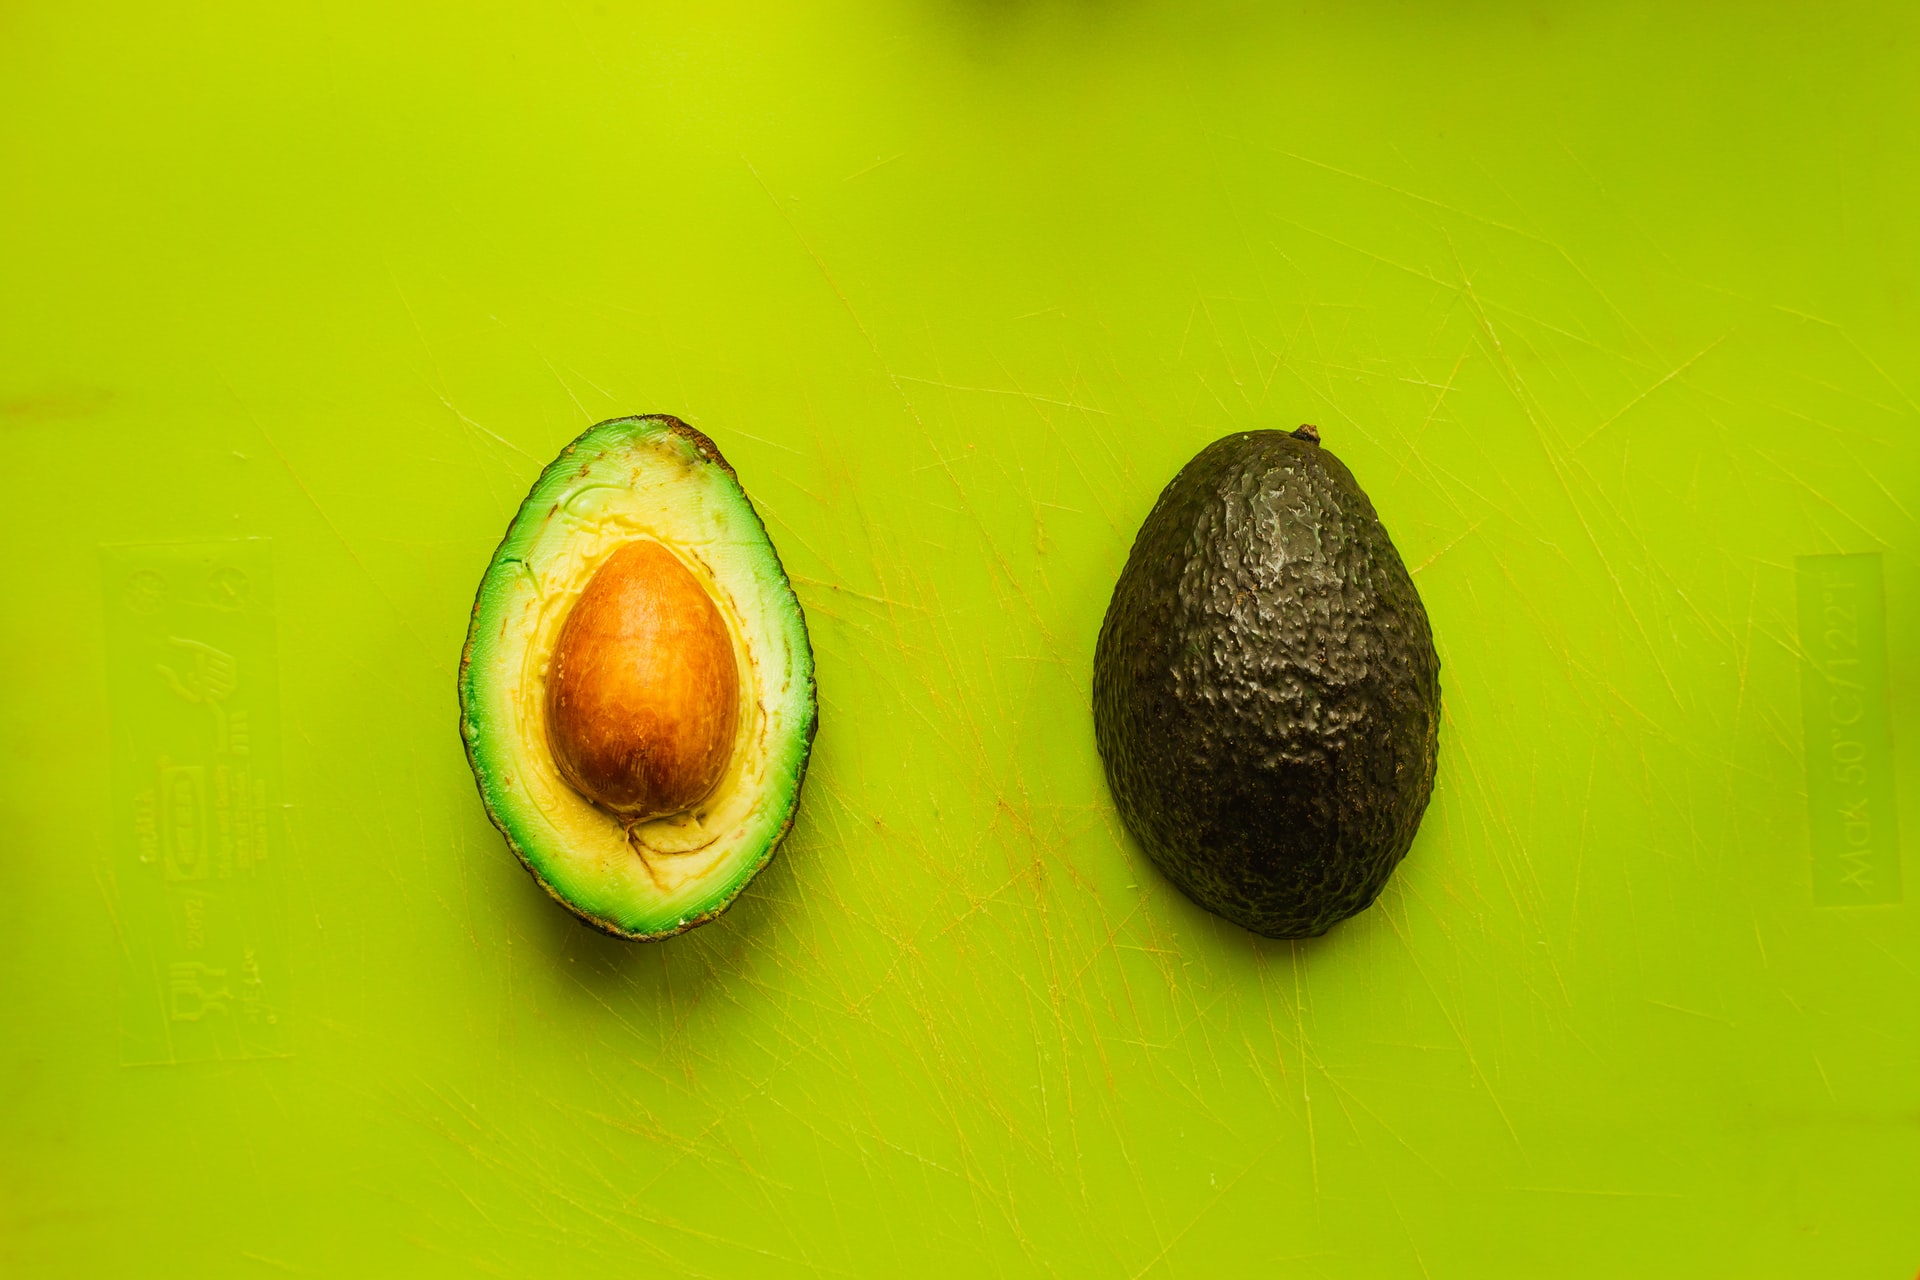 How to Plant Your First Avocado During Quarantine 15